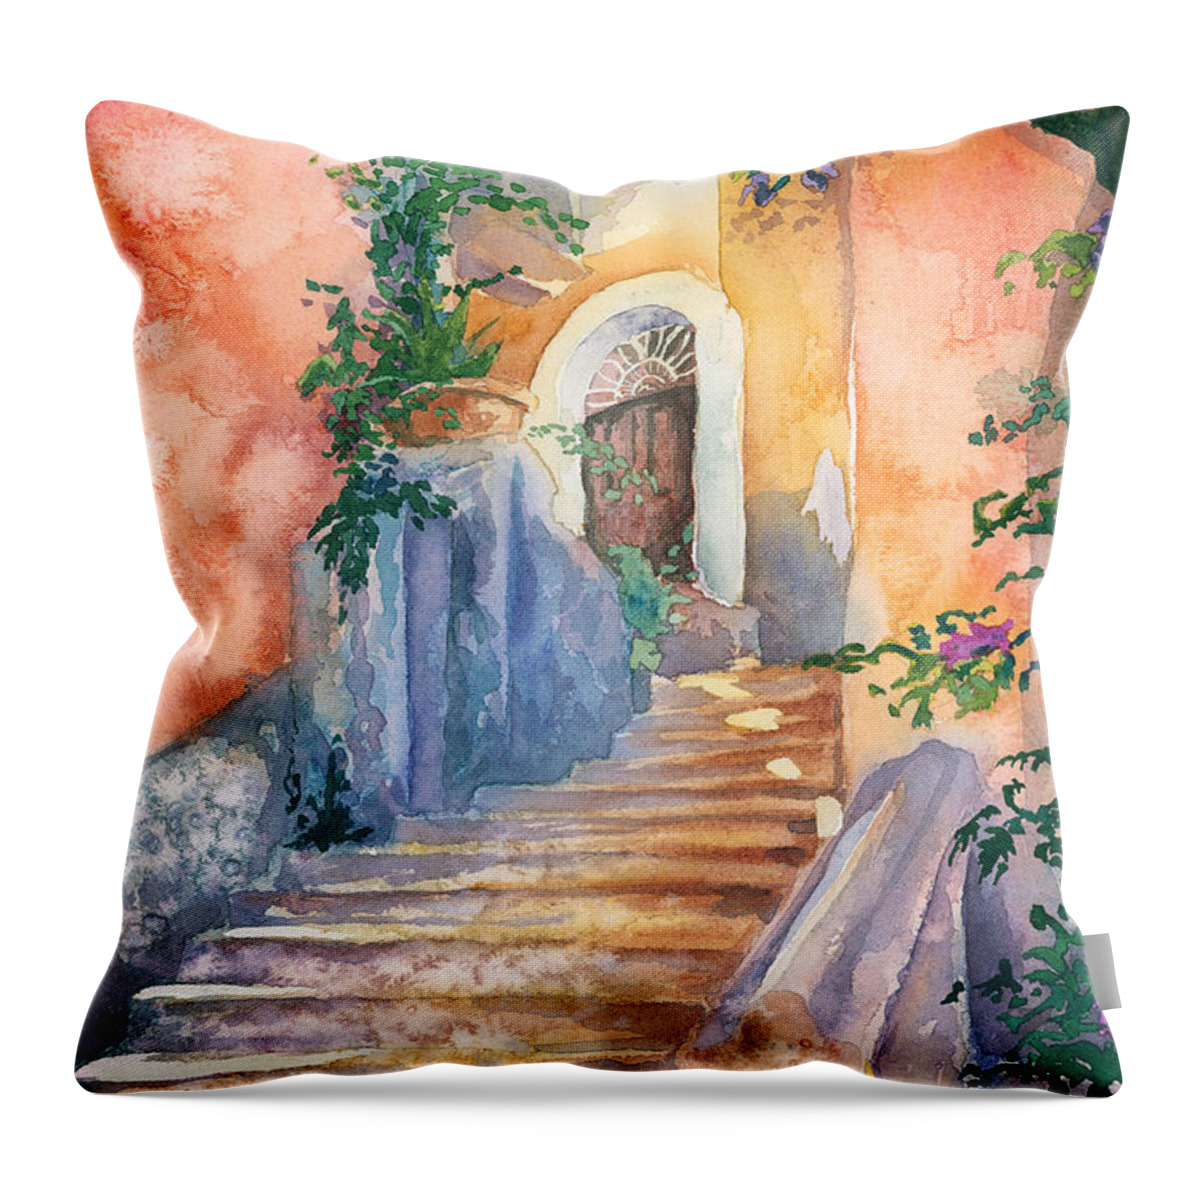 Watercolor Painting Throw Pillow featuring the painting Magical Stairs by Espero Art